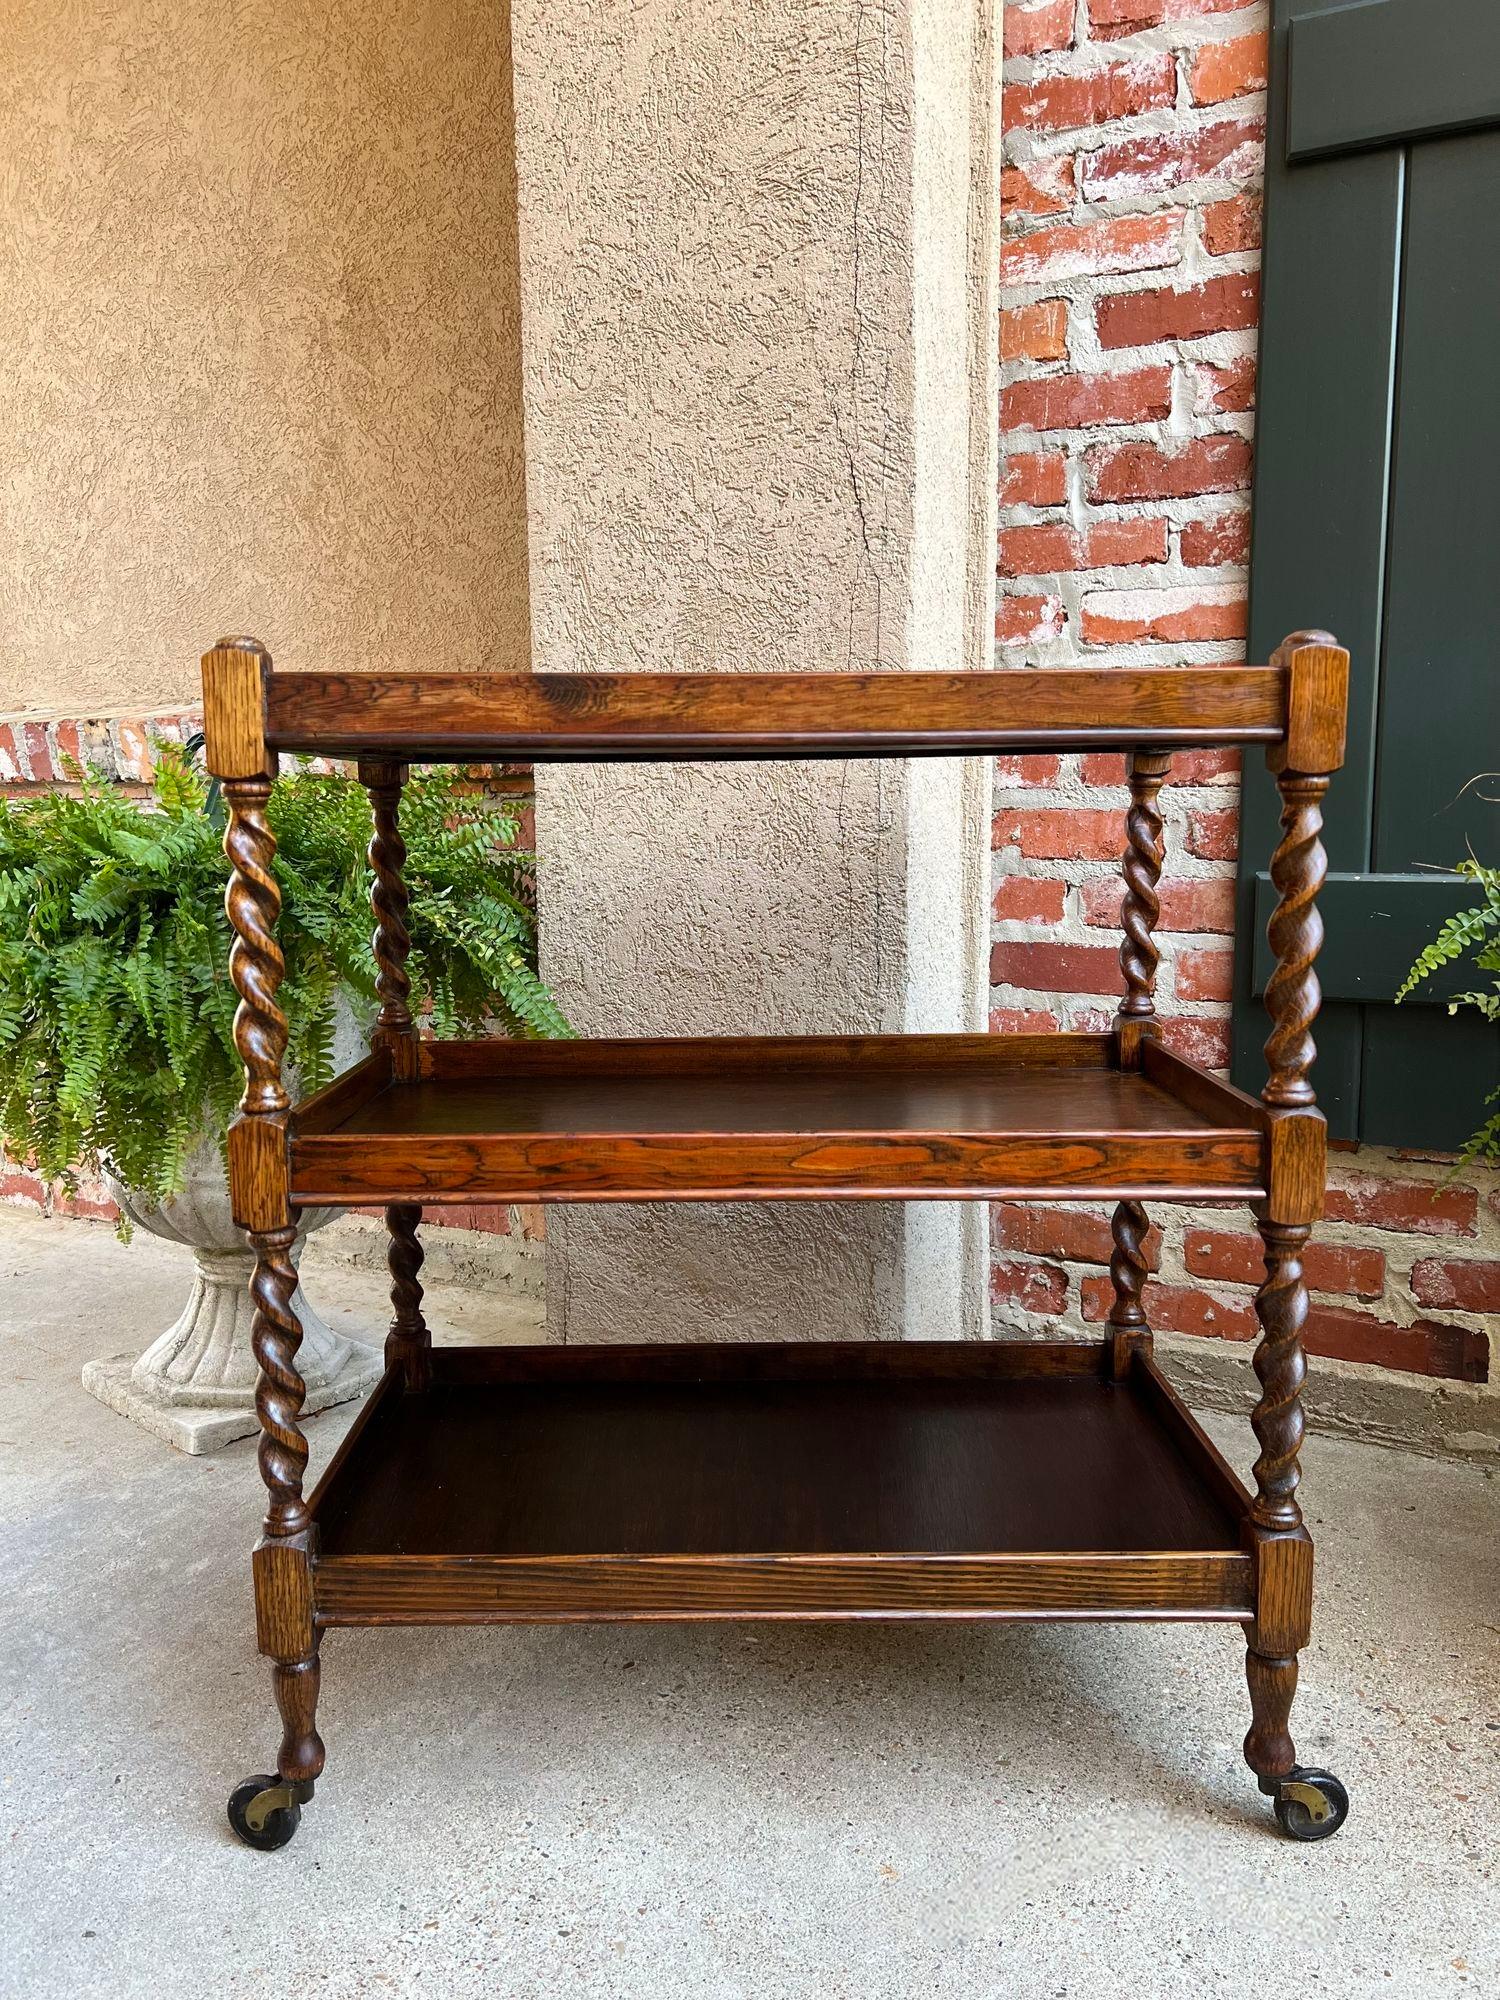 Antique English Oak Tea Trolley Drinks Wine Serving Cart Barley Twist Dumbwaiter.

Direct from England, a beautiful antique English oak tea trolley or “dumbwaiter” serving cart. Excellent for entertaining and great for use as a side table or sofa